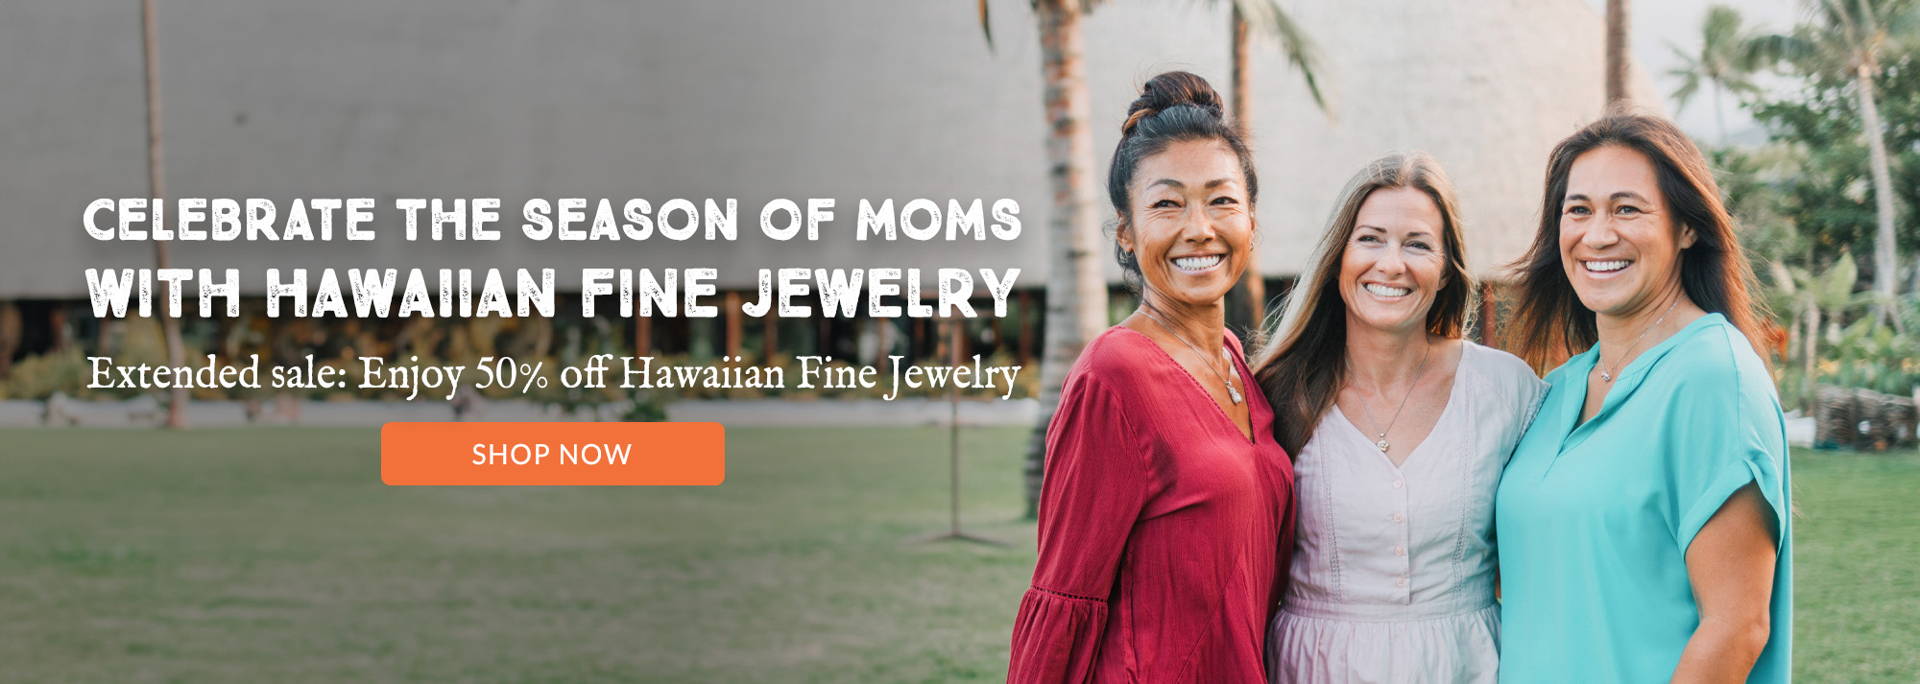 Early Mother's Day Sale: 50% Off Hawaiian Fine Jewelry. Shop Early Mother's Day Sale! Treat Mom to exquisite Hawaiian fine jewelry at 50% off. Send aloha from the islands and make it unforgettable!